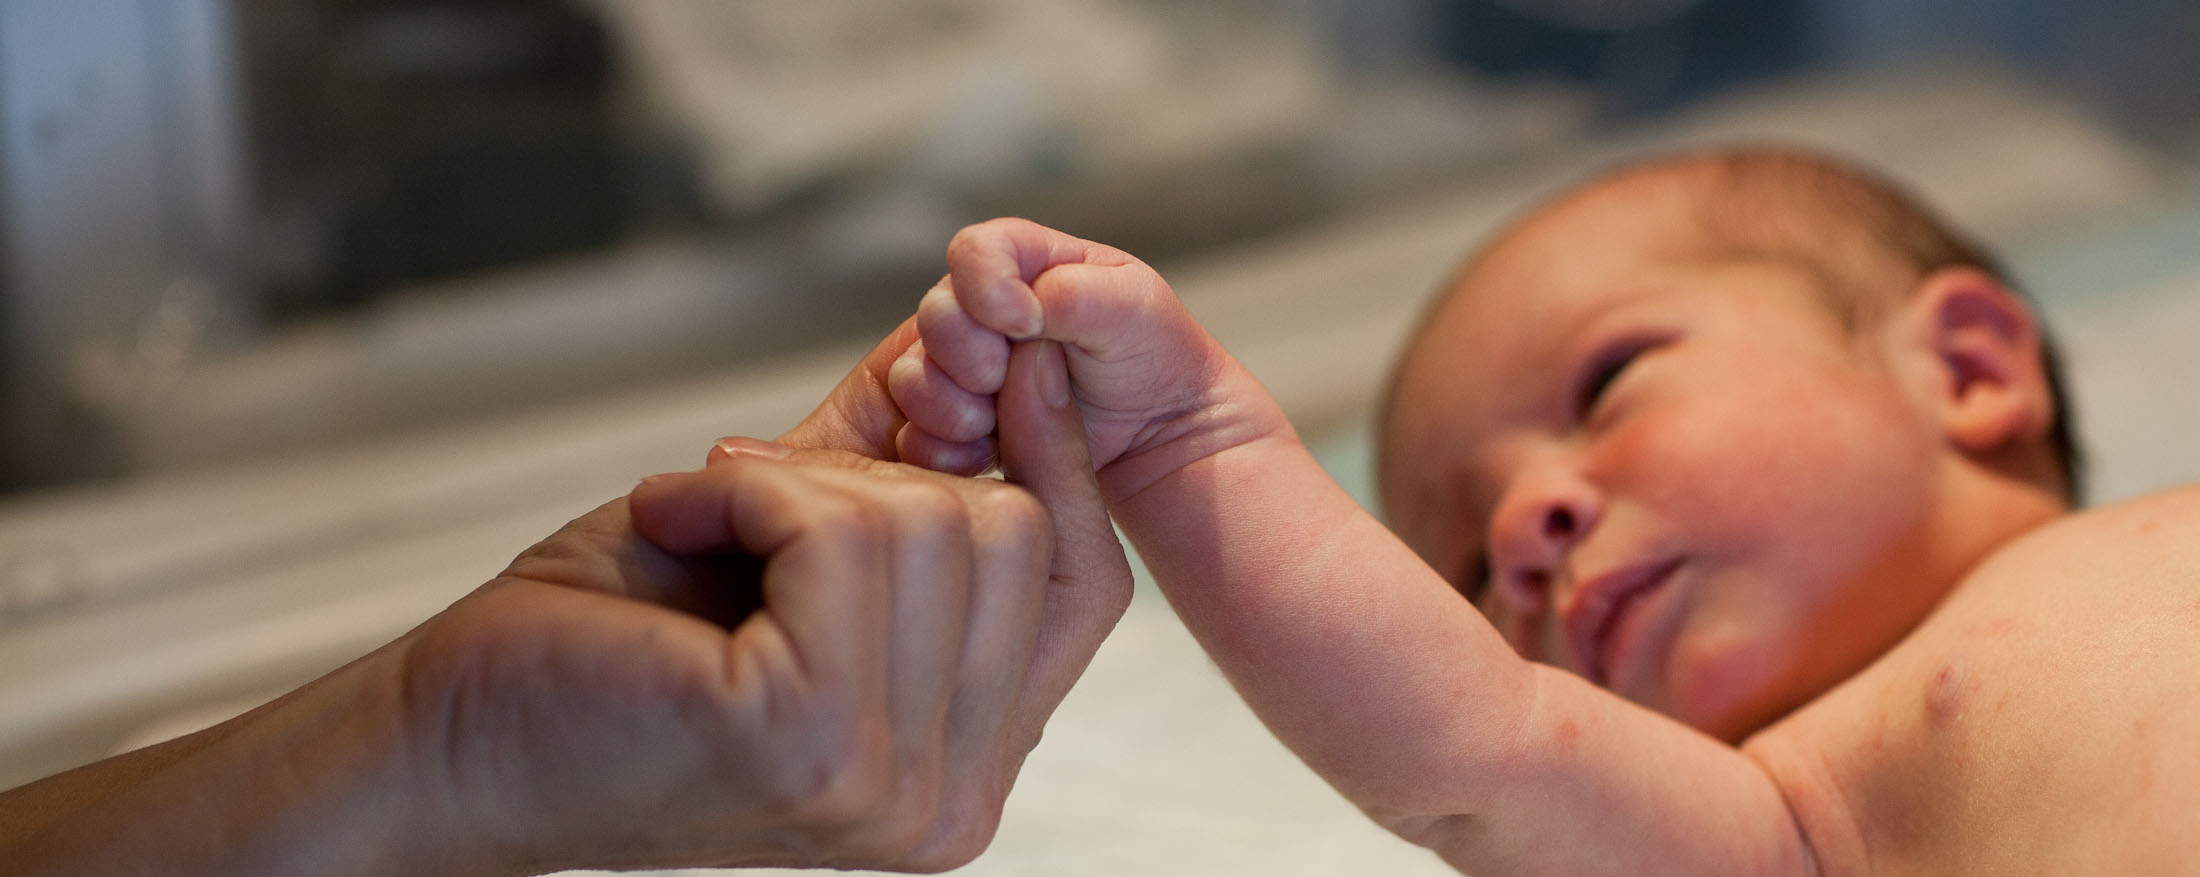 An adult gently holding a newborn's hand